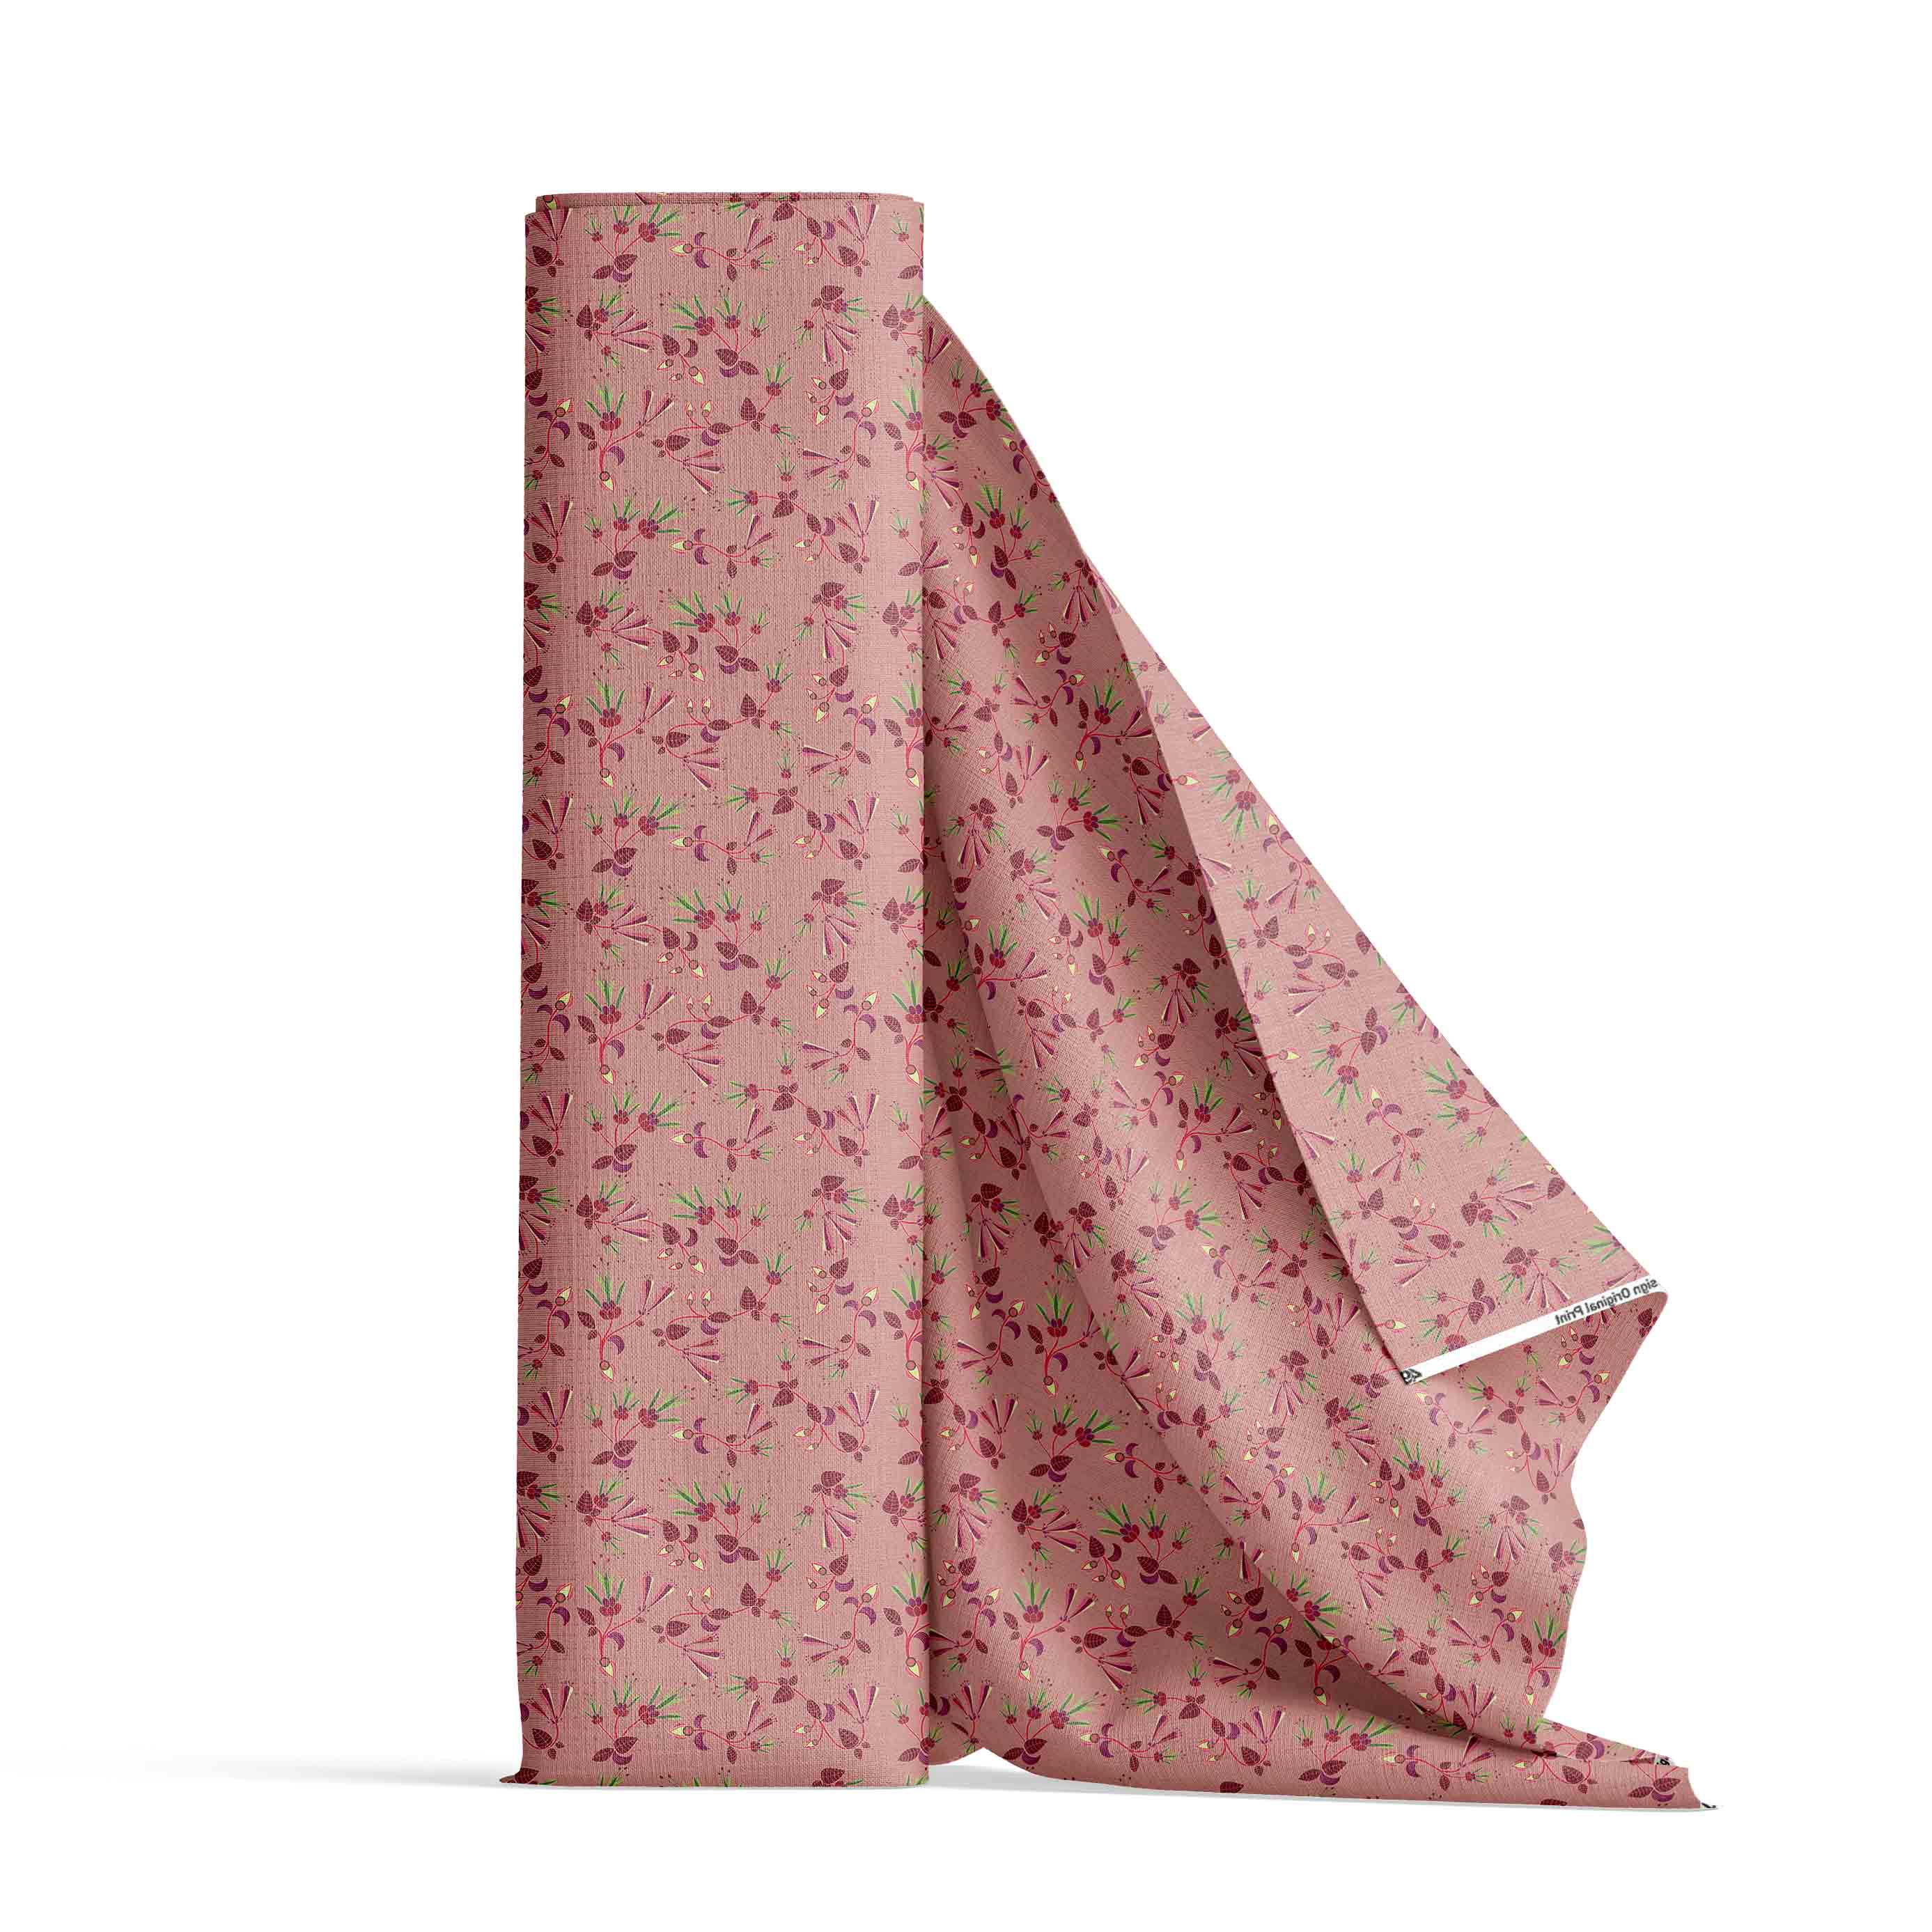 Swift Floral Peach Rouge Remix Cotton Poplin Fabric By the Yard